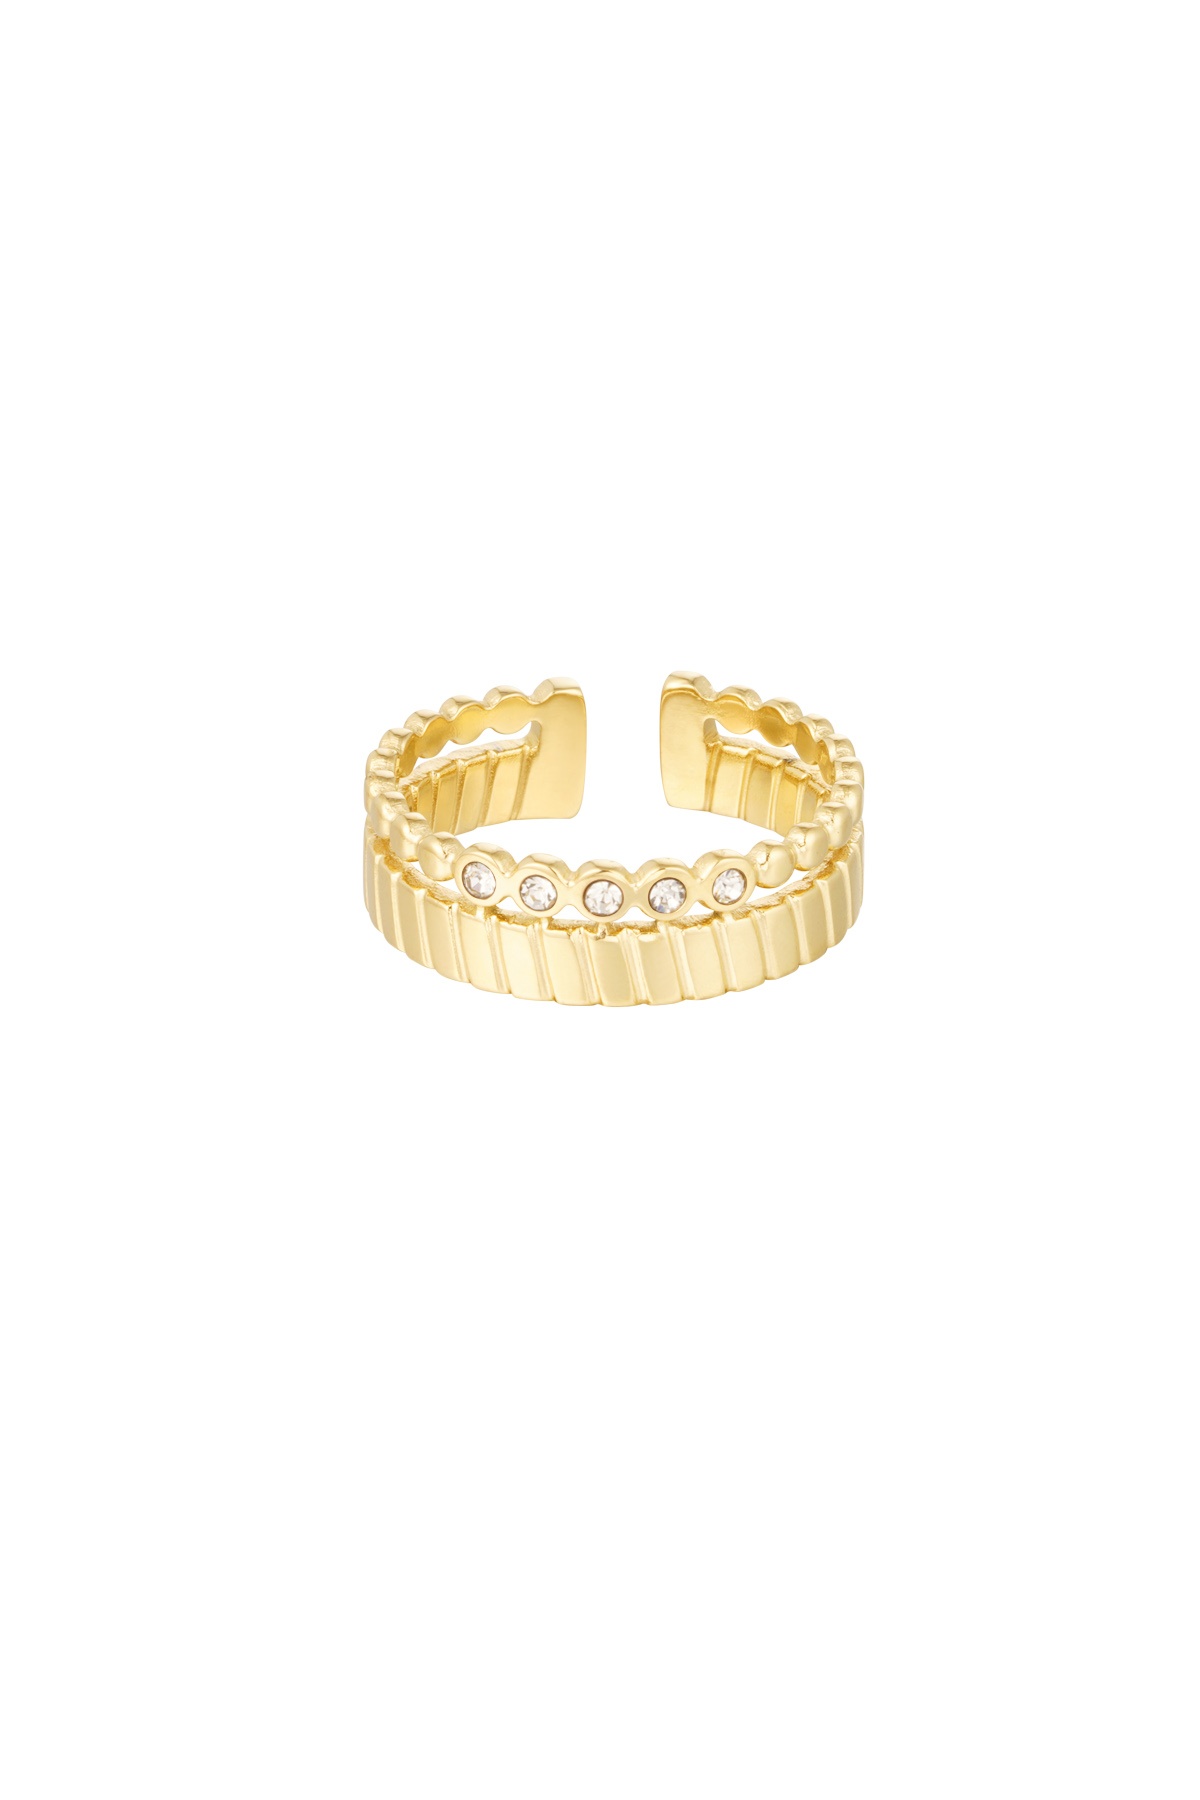 Ring stripes with stones - gold